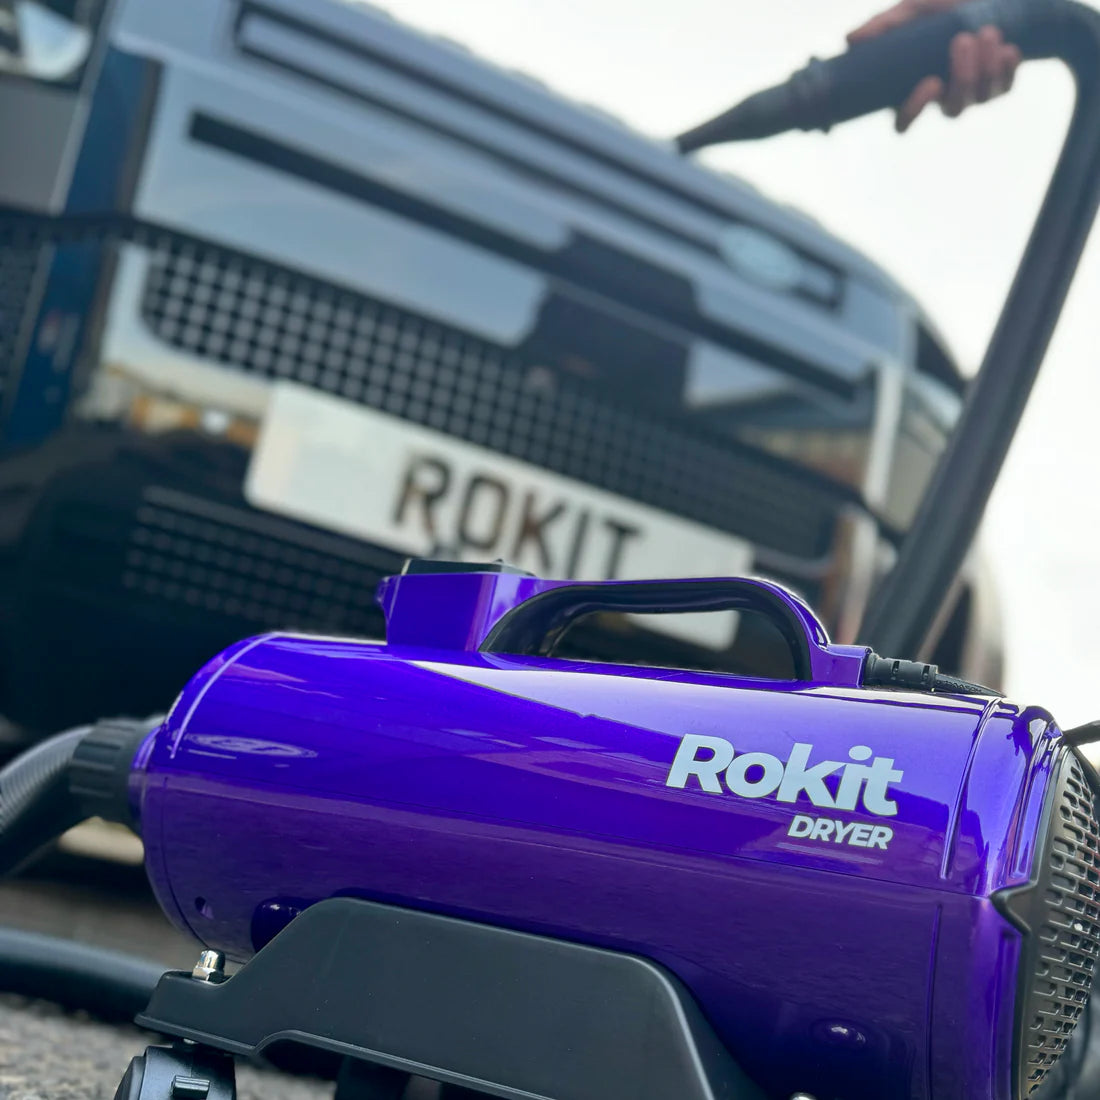 Rokit Resolution 2 (R2) Car Dryer / Forced Air Vehicle Dryer